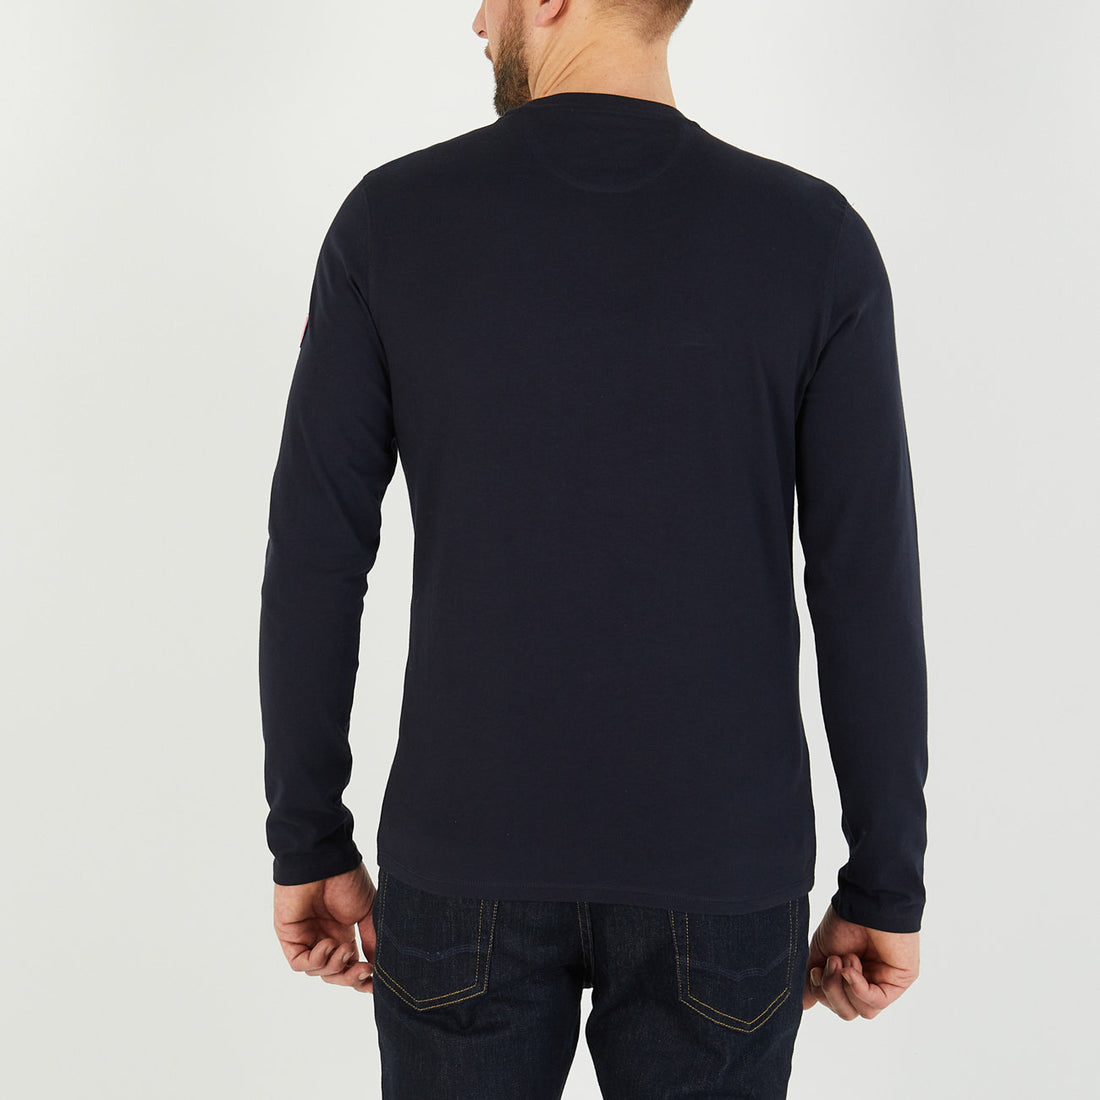 Long-Sleeved Navy Blue T-Shirt With Eden Park French Flair Embroidery_H23MAITL0005_BLF_02